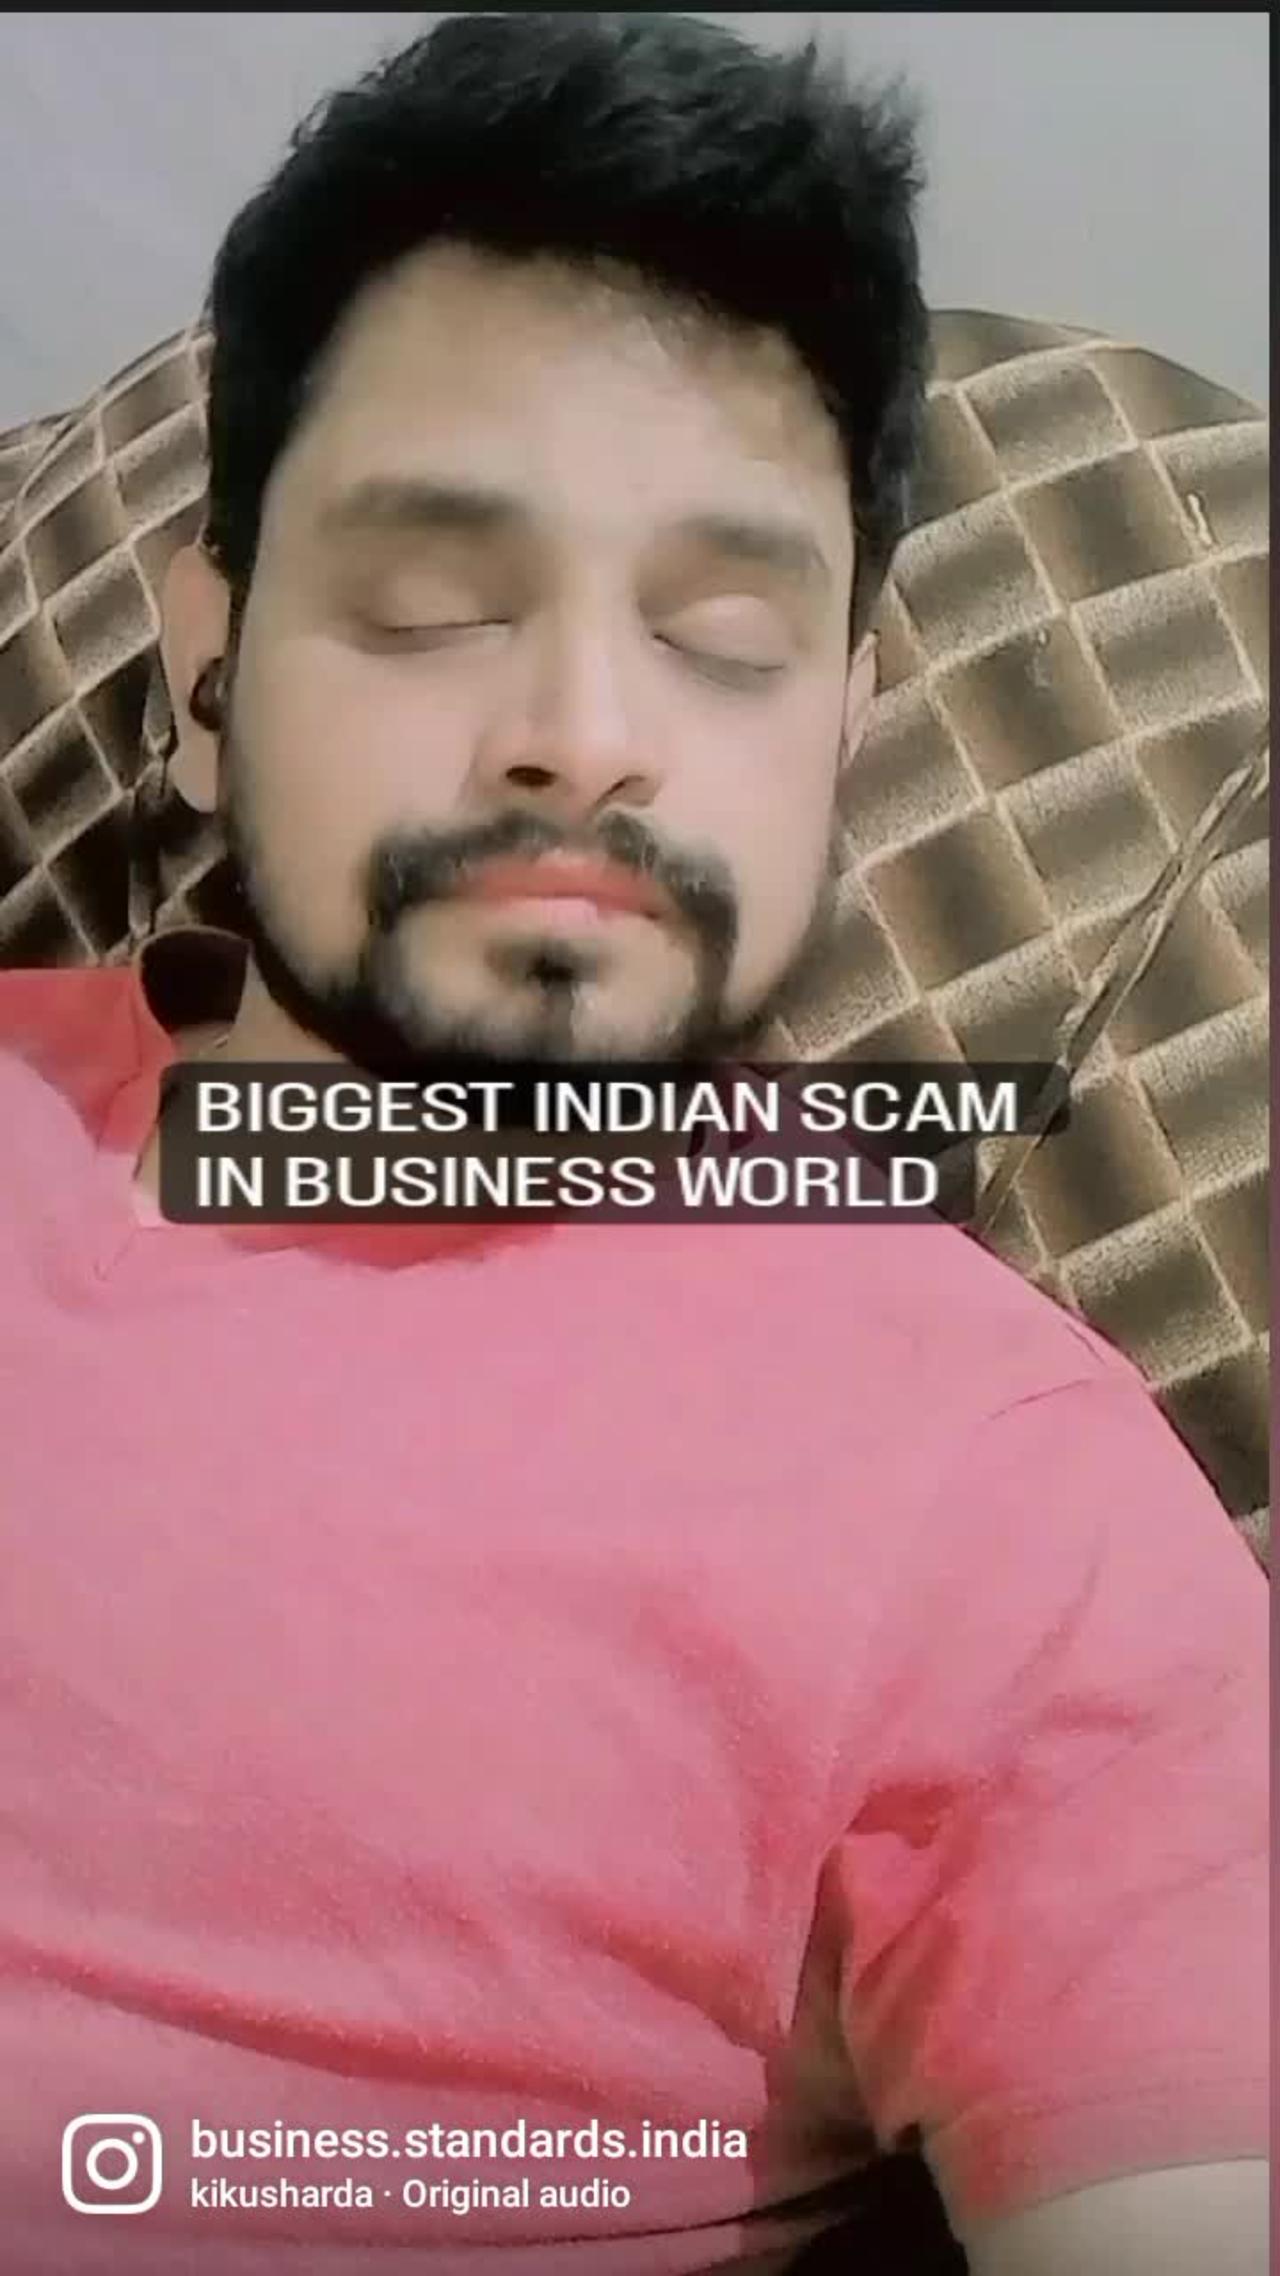 BIGGEST INDIAN SCAM IN BUSINESS WORLD